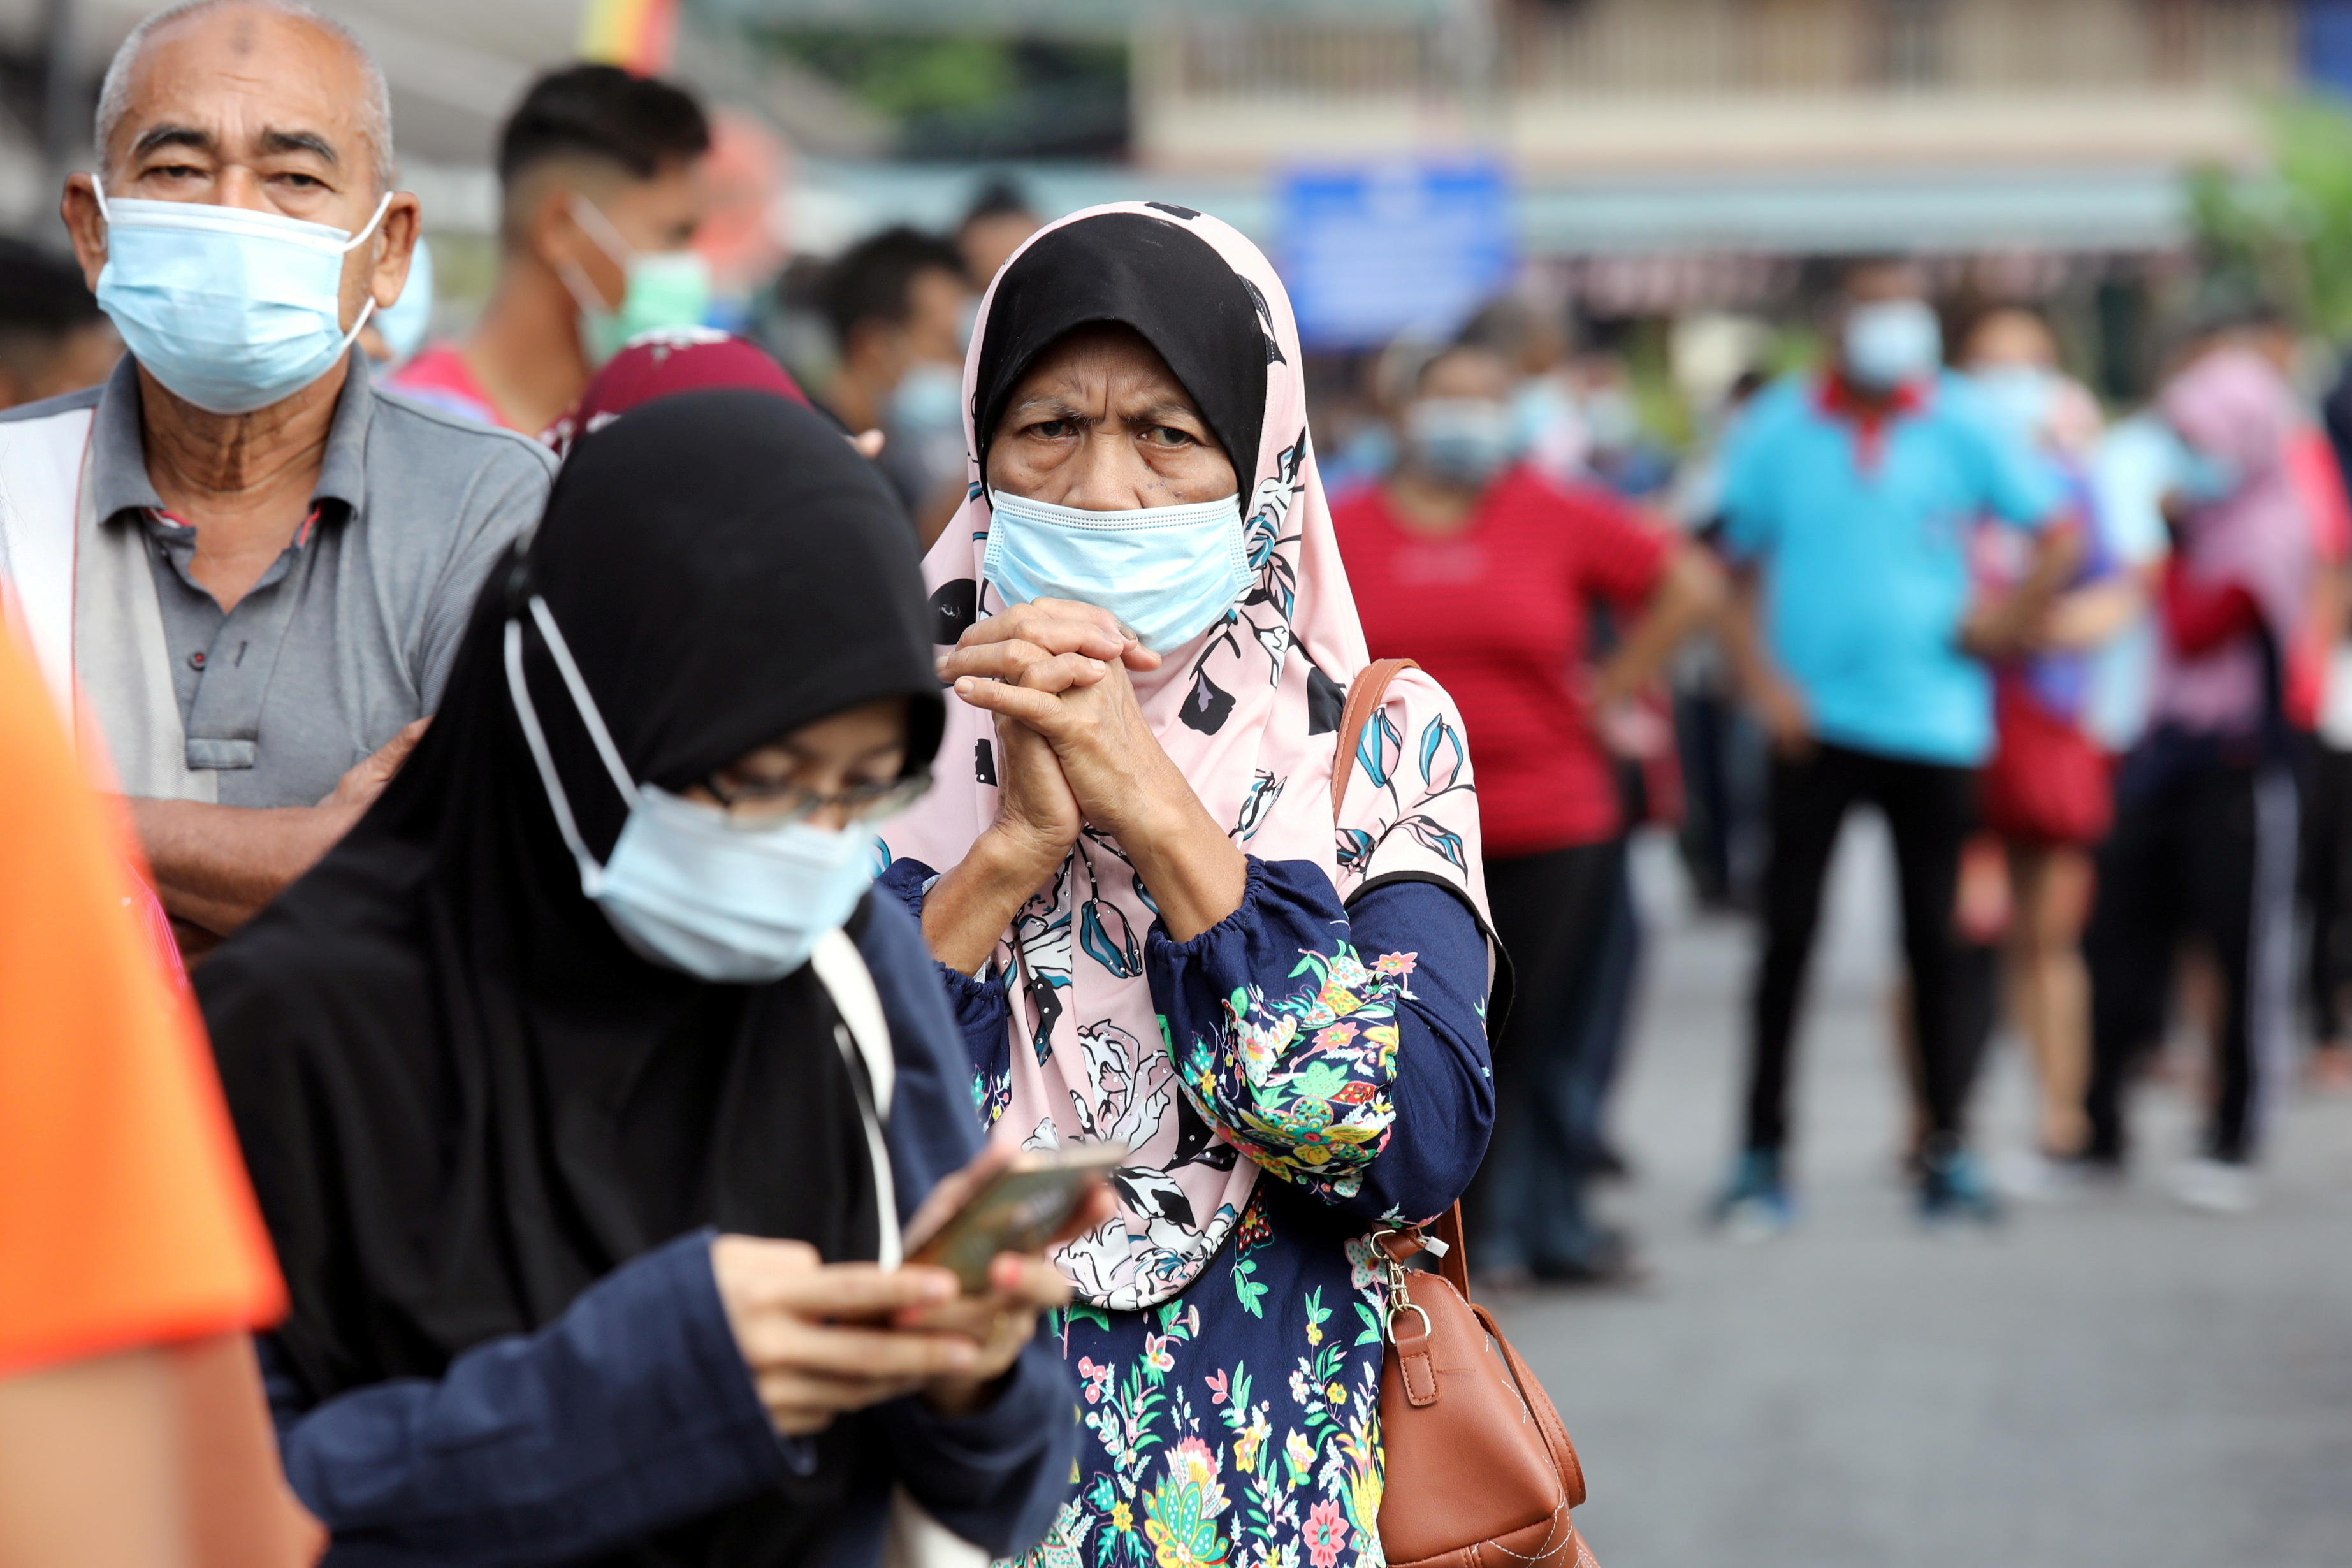 People wait in line to be tested for the coronavirus disease (COVID-19) at a testing station in Klang